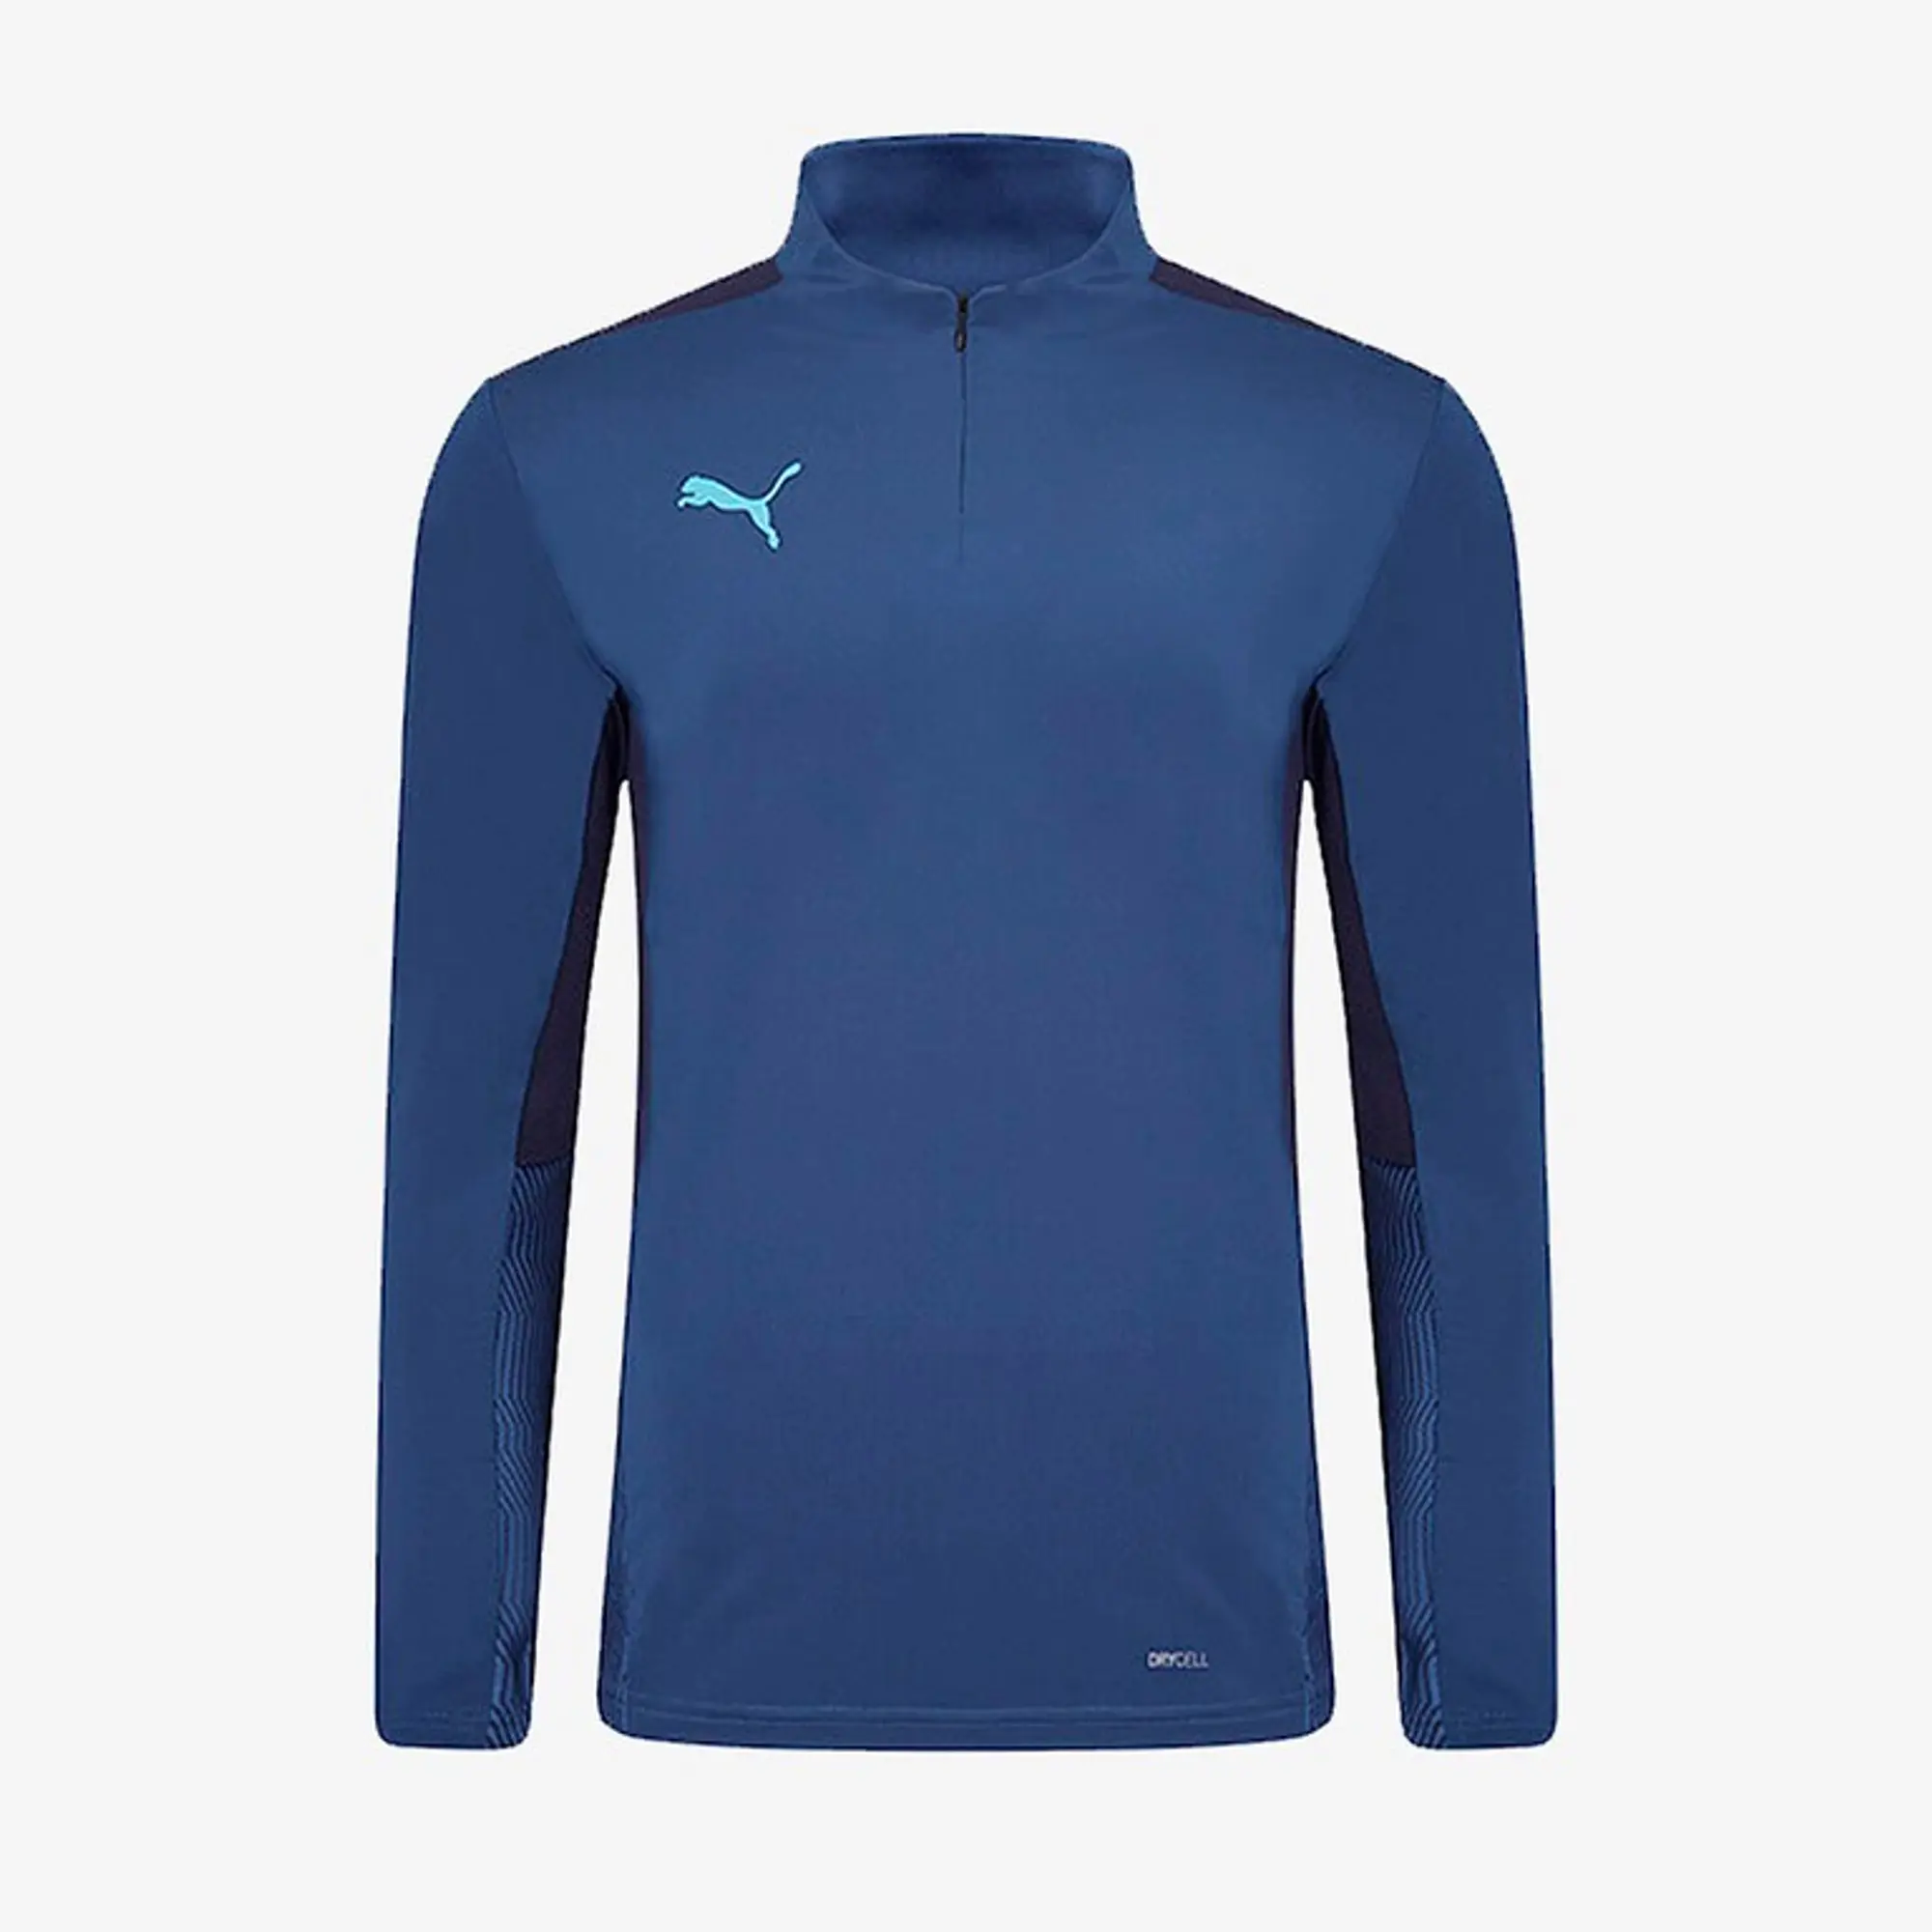 Puma Mens Cup Training 1/4 Zip Top Limoges/Peacoat/Blue Atoll